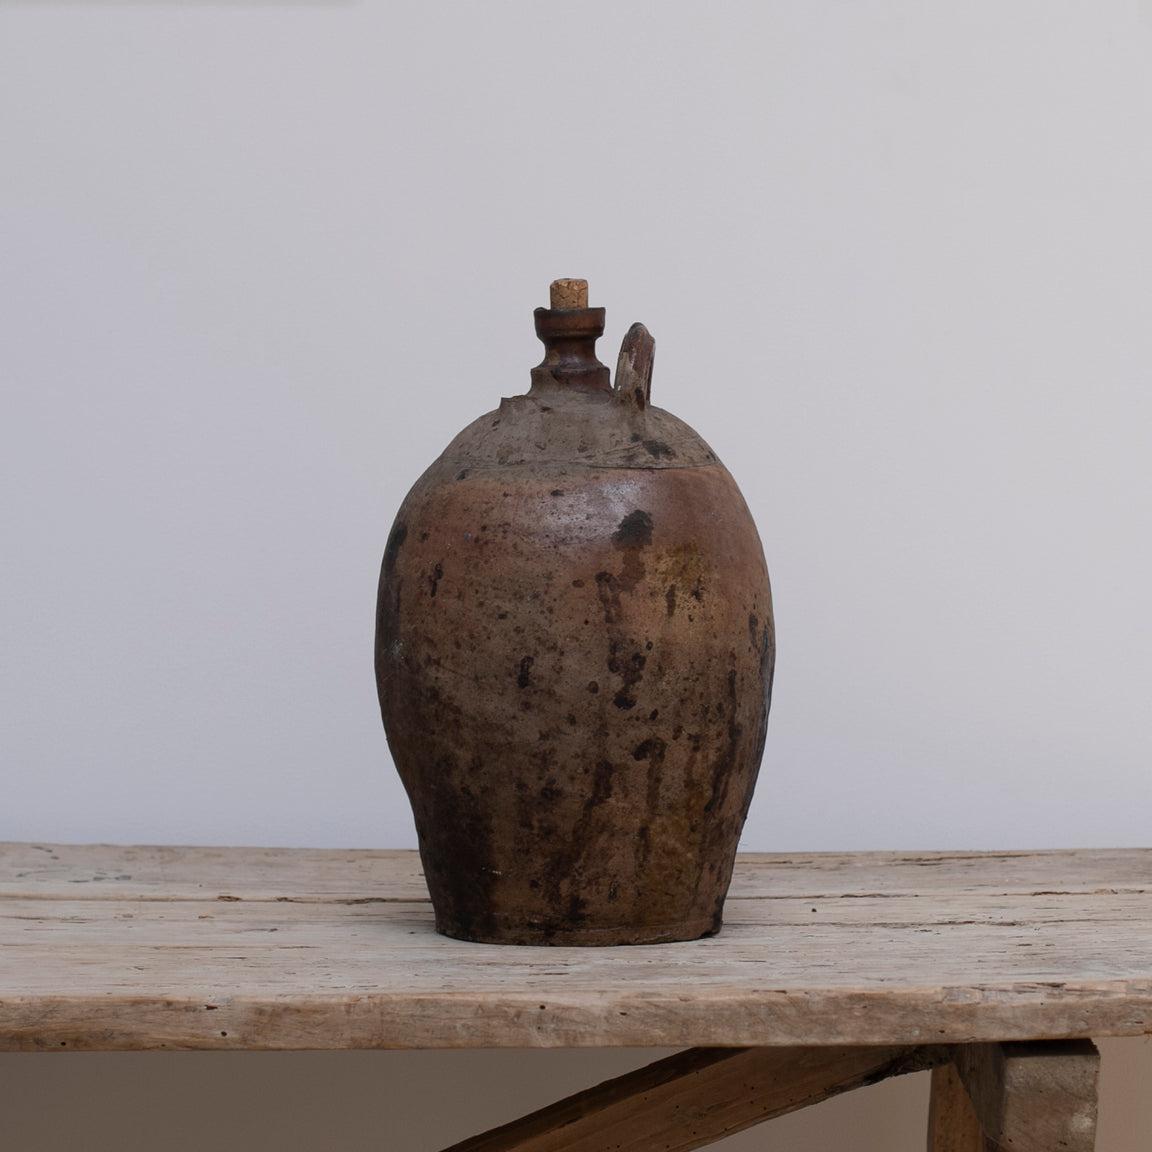 A rustic French pottery jug with a cork lid from Late 19th century, with great patina.
One pf the handles is broken and missing, but the rustic appearance is still great.
The right one in the last two pictures.